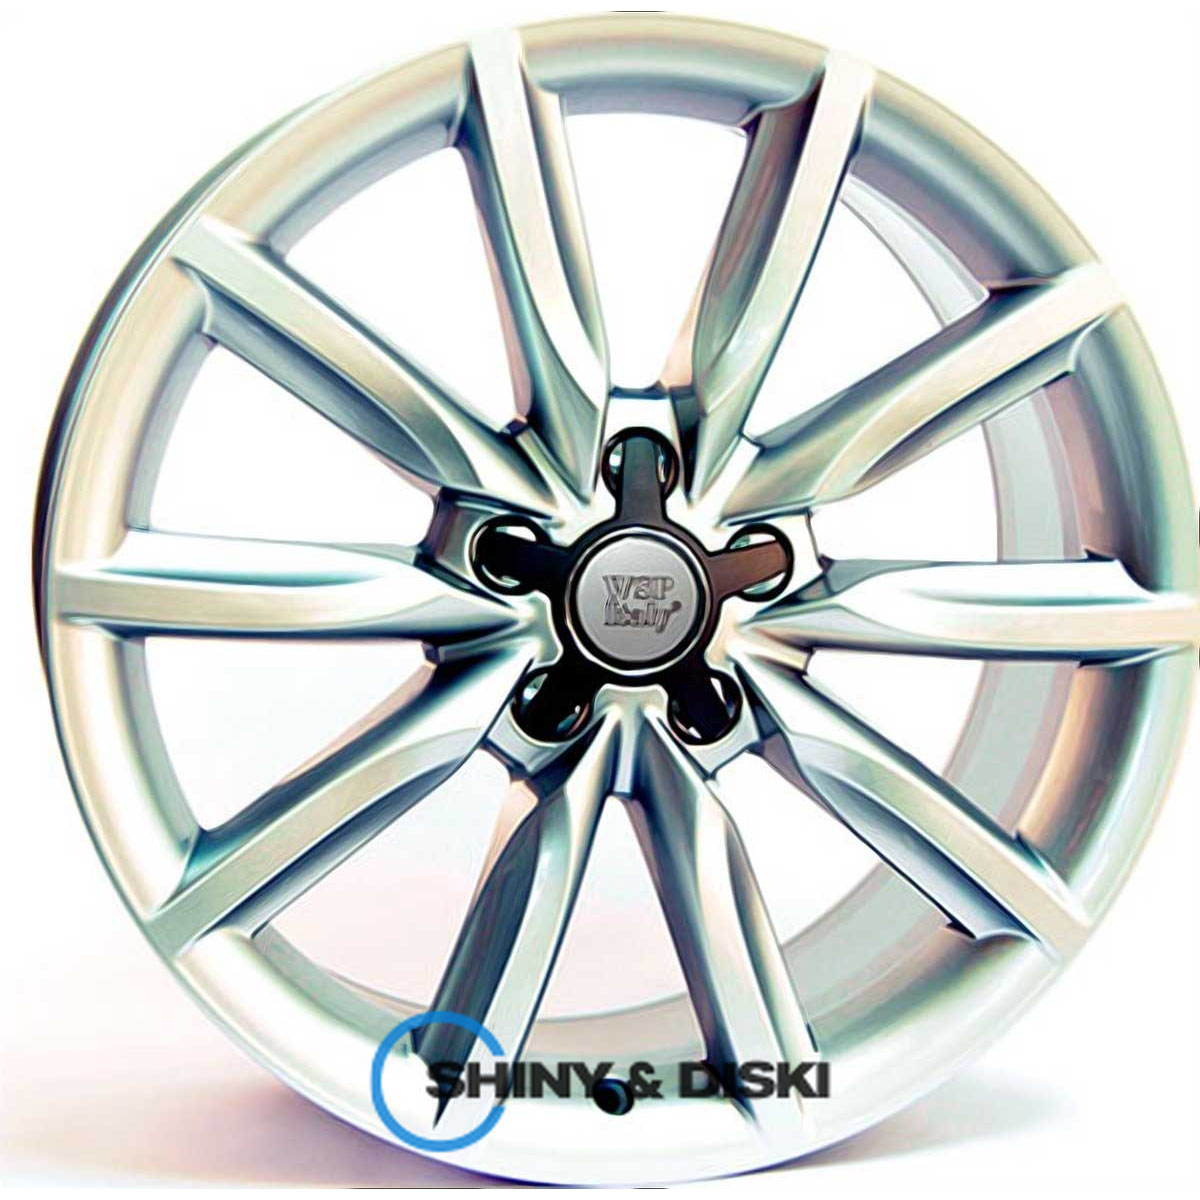 wsp italy audi w550 allroad canyon s r18 w8 pcd5x112 et30 dia66.6